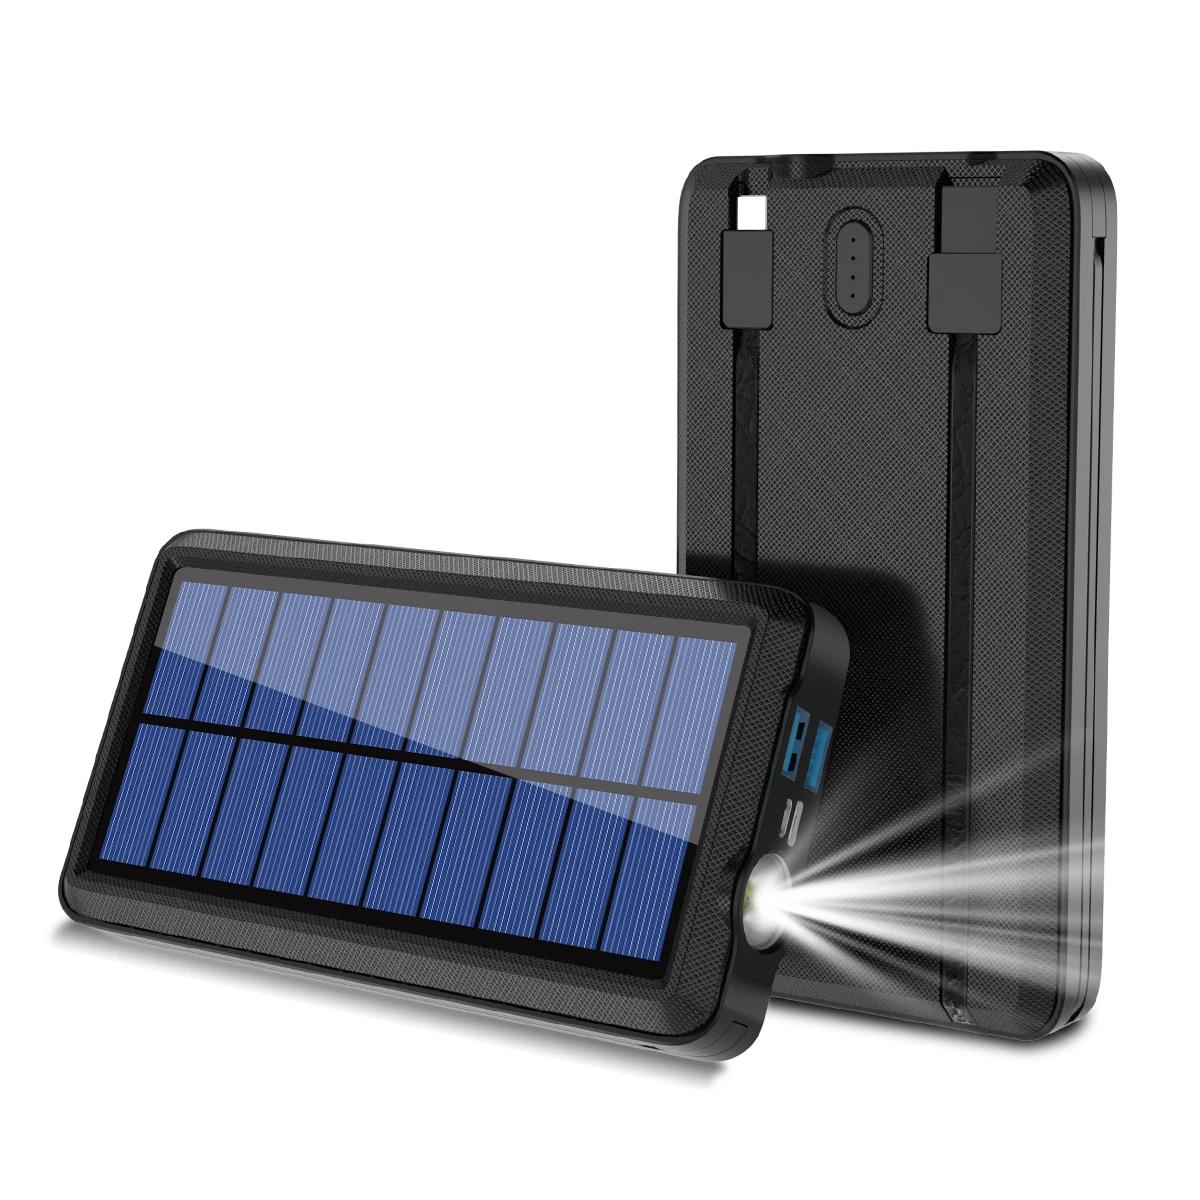 samsung battery pack 80000mah Qi Wireless Powerbank Charging Solar Batteery Panel Portable LED Emergency Fast External Battery For Iphone Samsung best power bank for mobile Power Bank